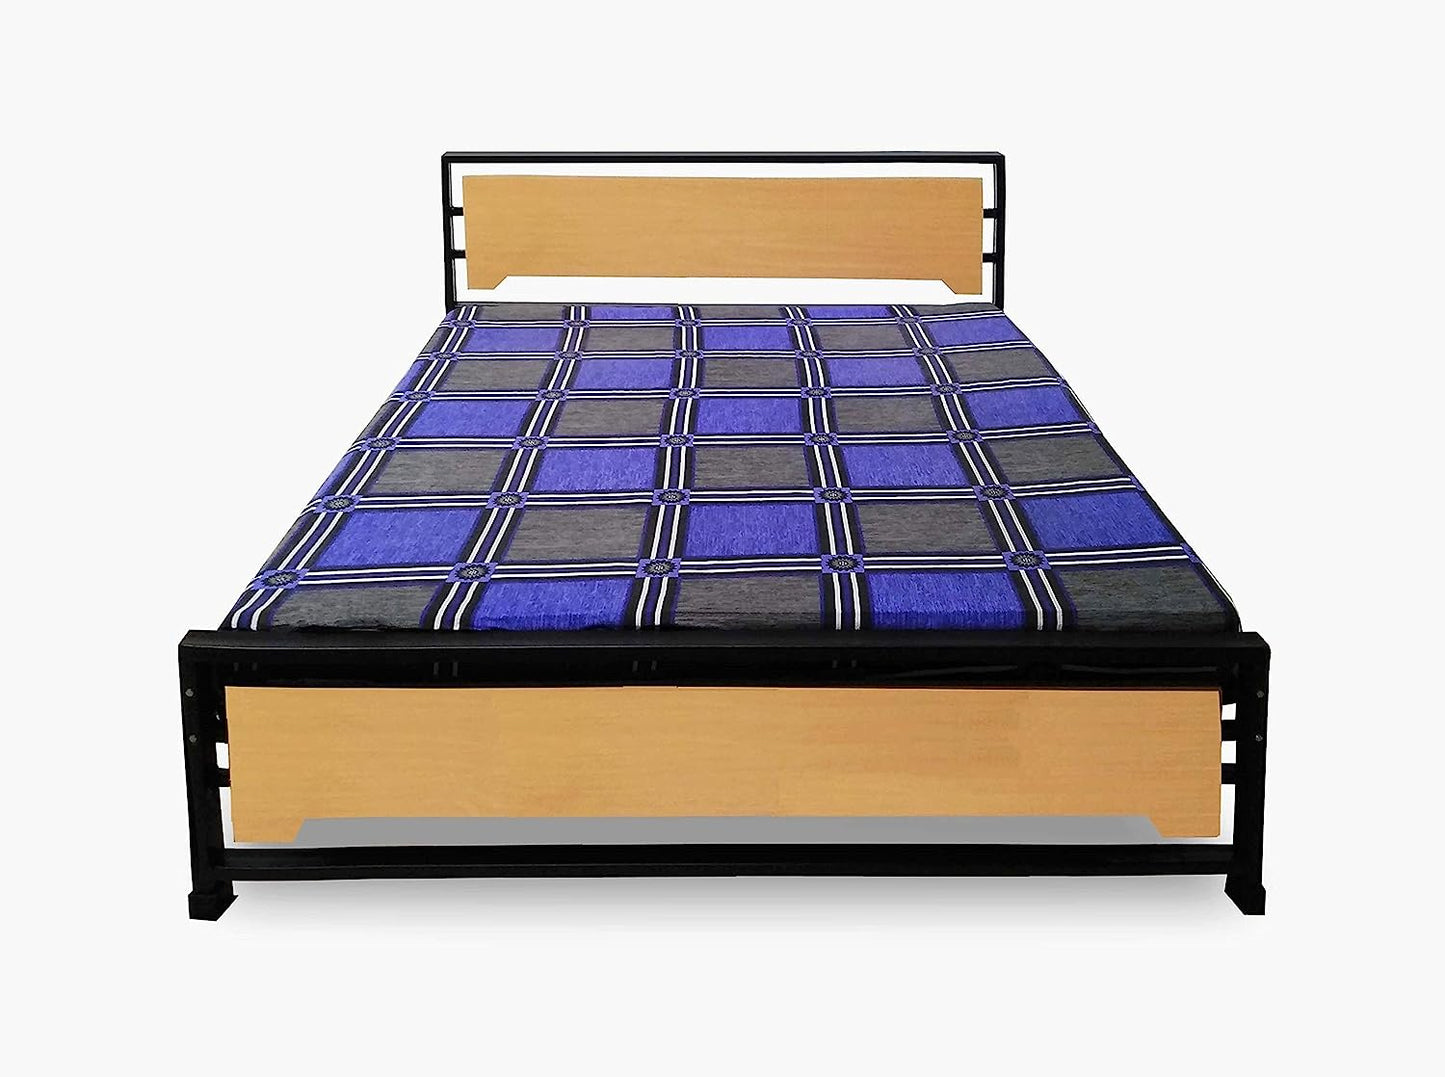 Bowzar Metal Bed Wooden Design King Size 72X78 Inch 6X6.5 Feet